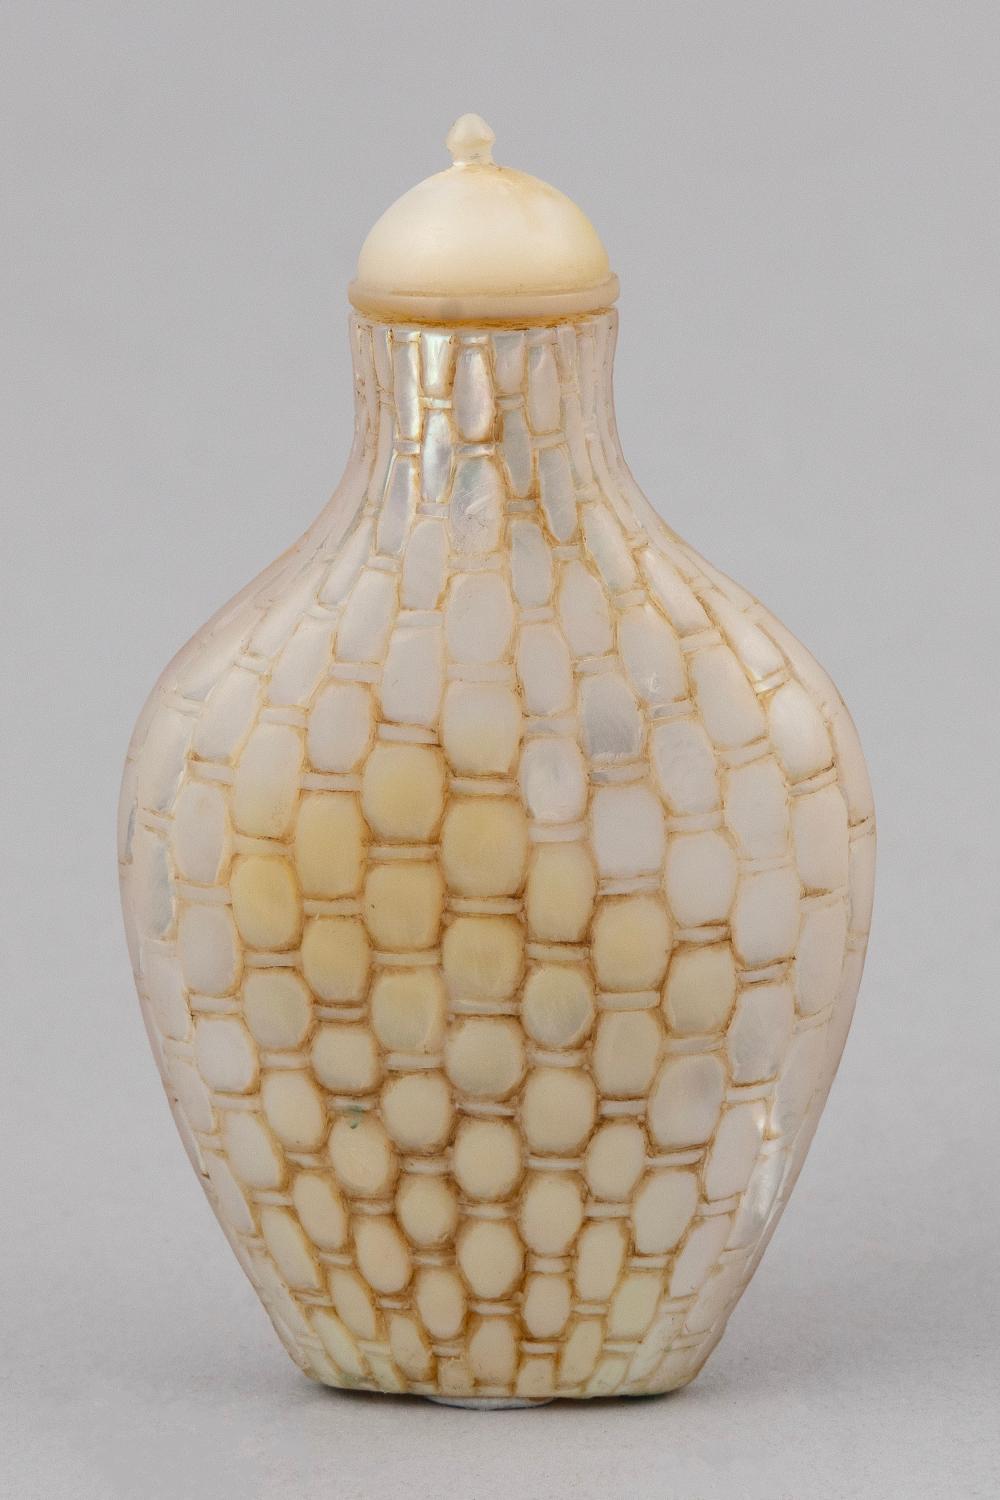 CHINESE MOTHER OF PEARL SNUFF BOTTLE 3513c5